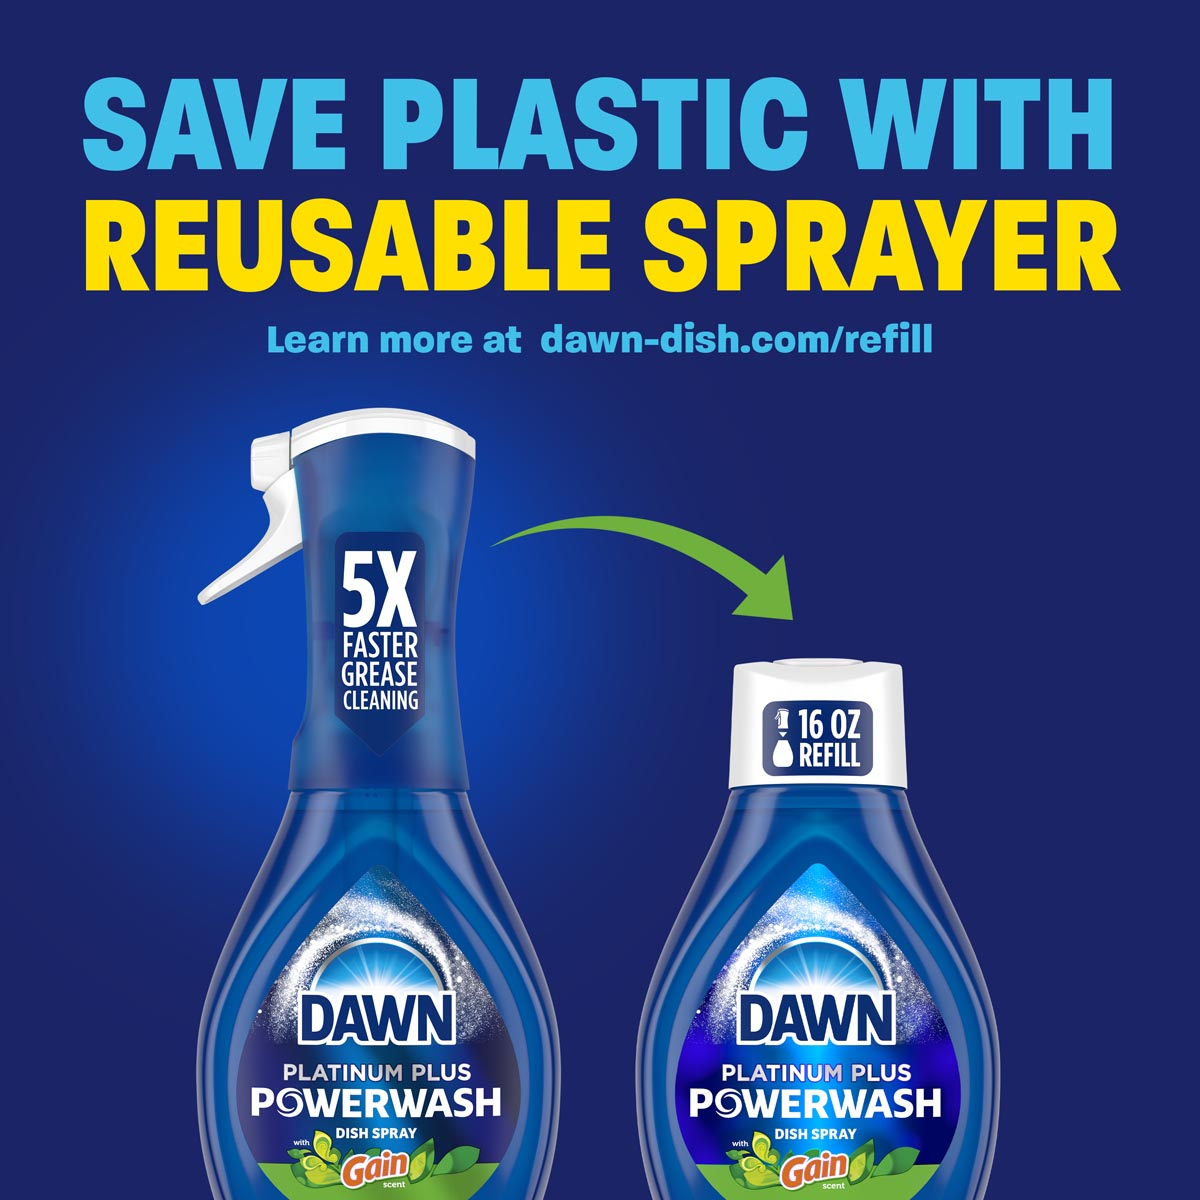 Dawn Powerwash Gain Starter Kit and Refill - Save Plastic With Reusable Sprayer